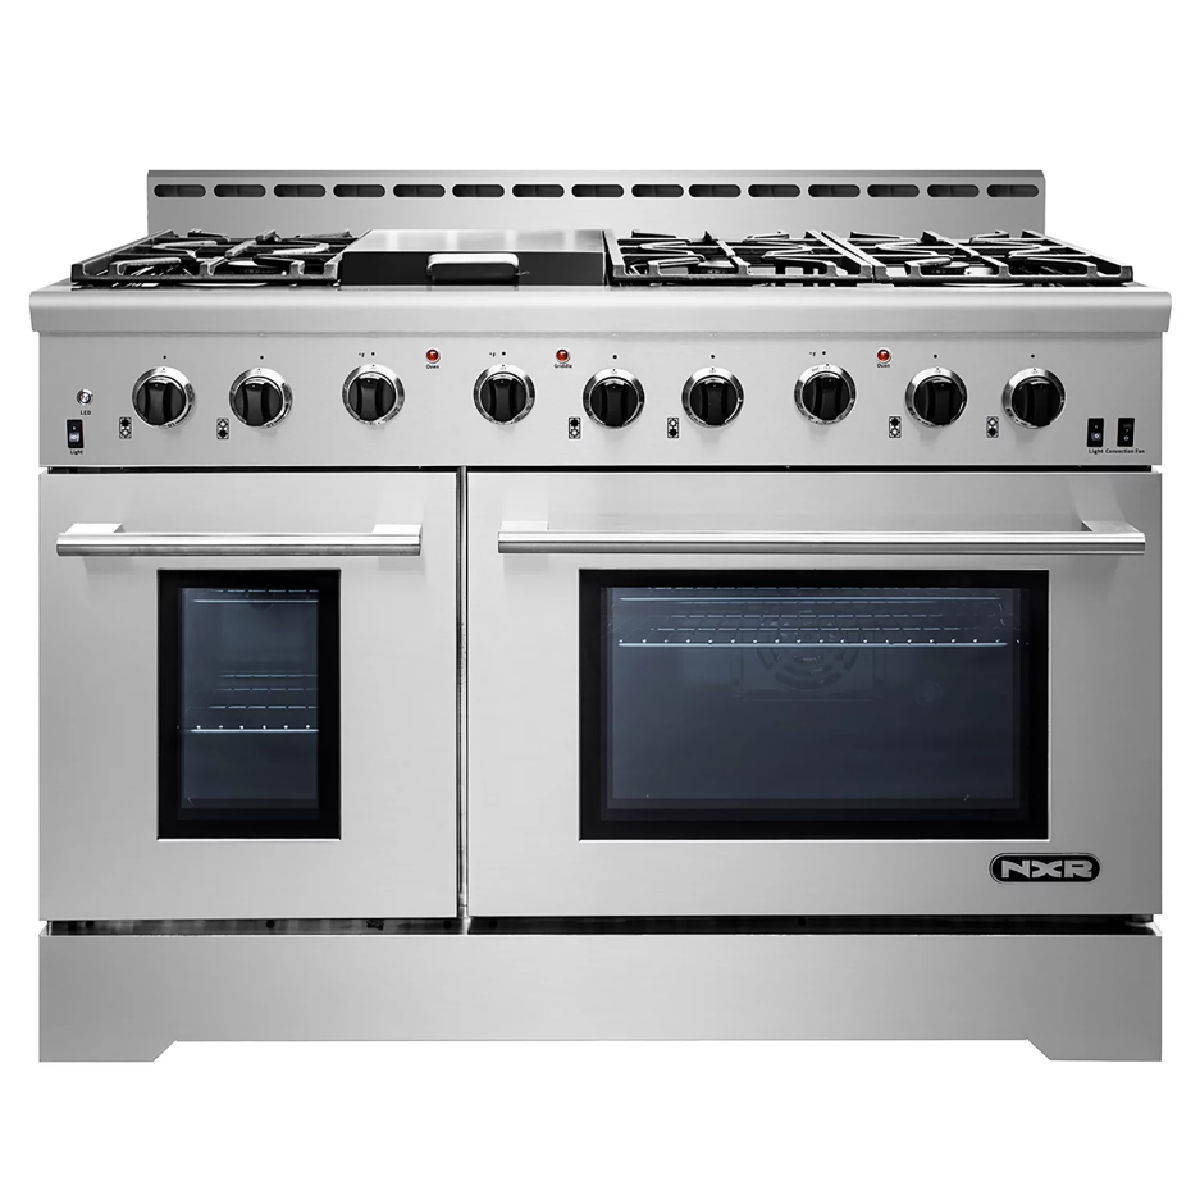 NXR MM4811 Stainless Steel 48-Inch Gas Range with LED